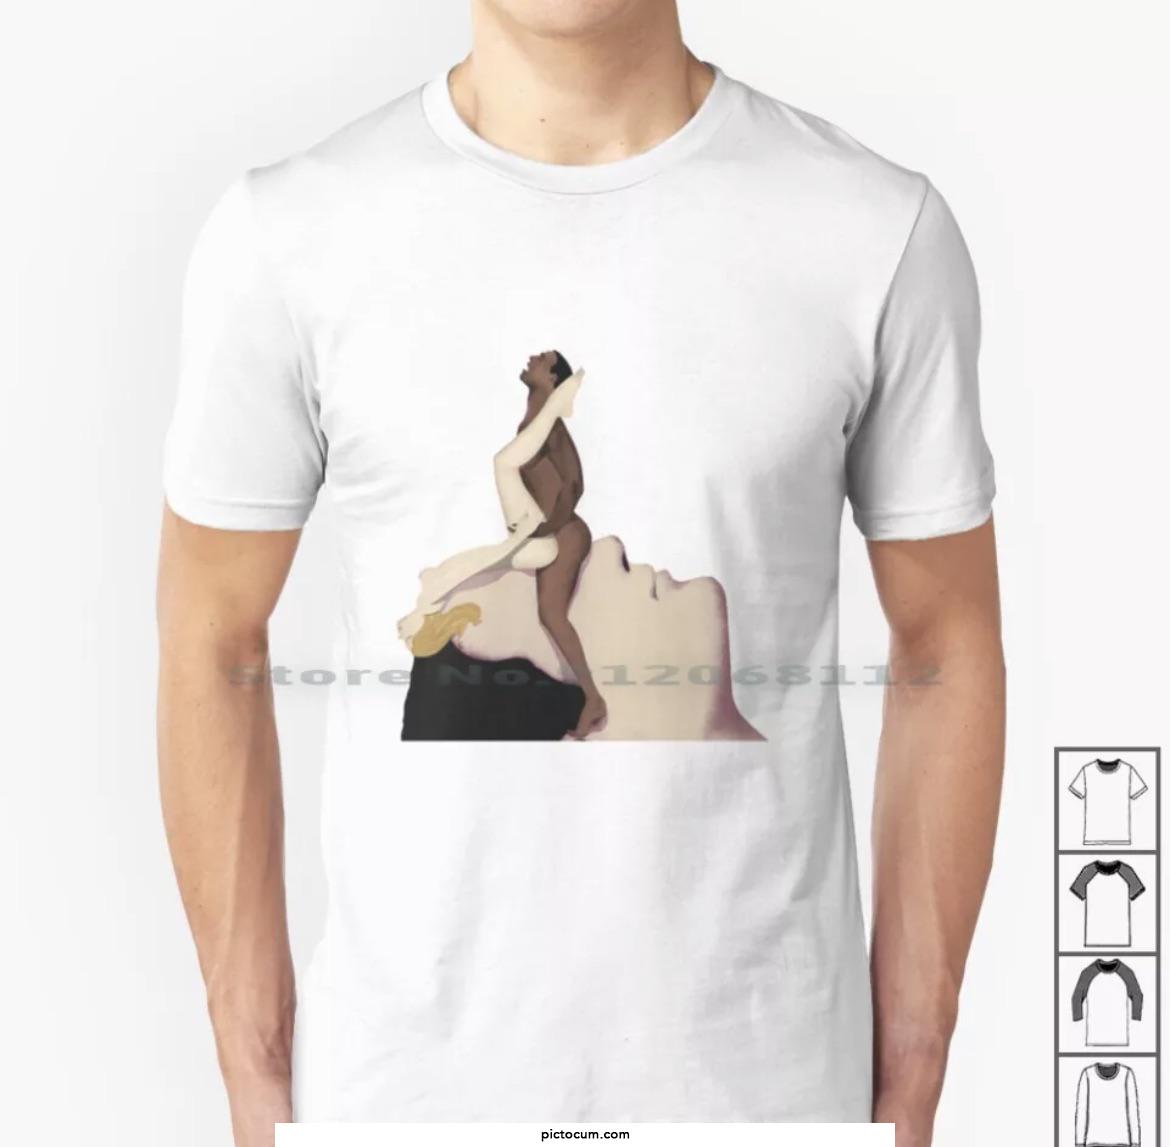 Considering buying this shirt for my cucky! What do you guys think?